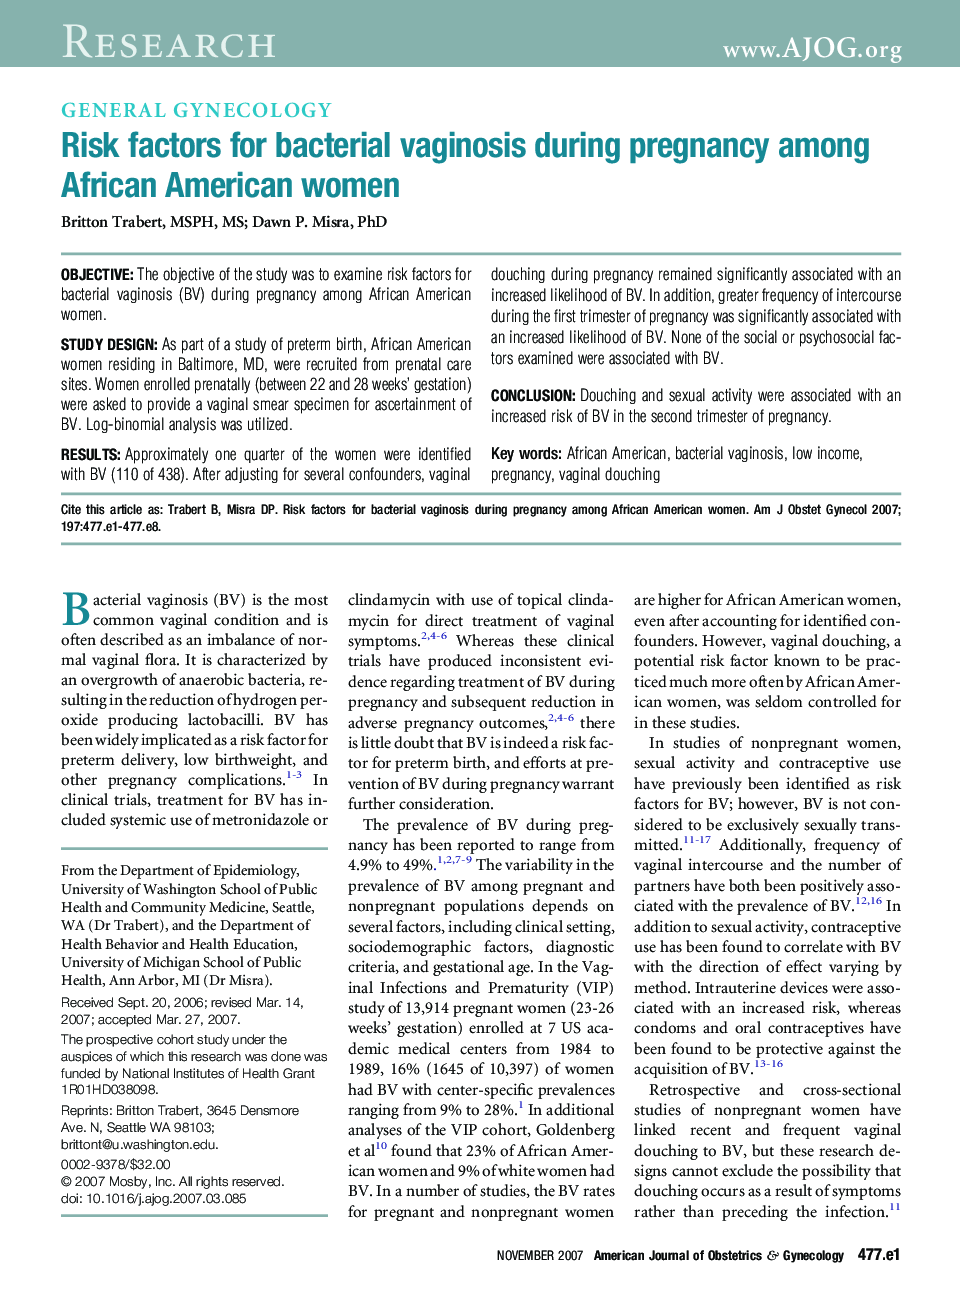 Risk factors for bacterial vaginosis during pregnancy among African American women